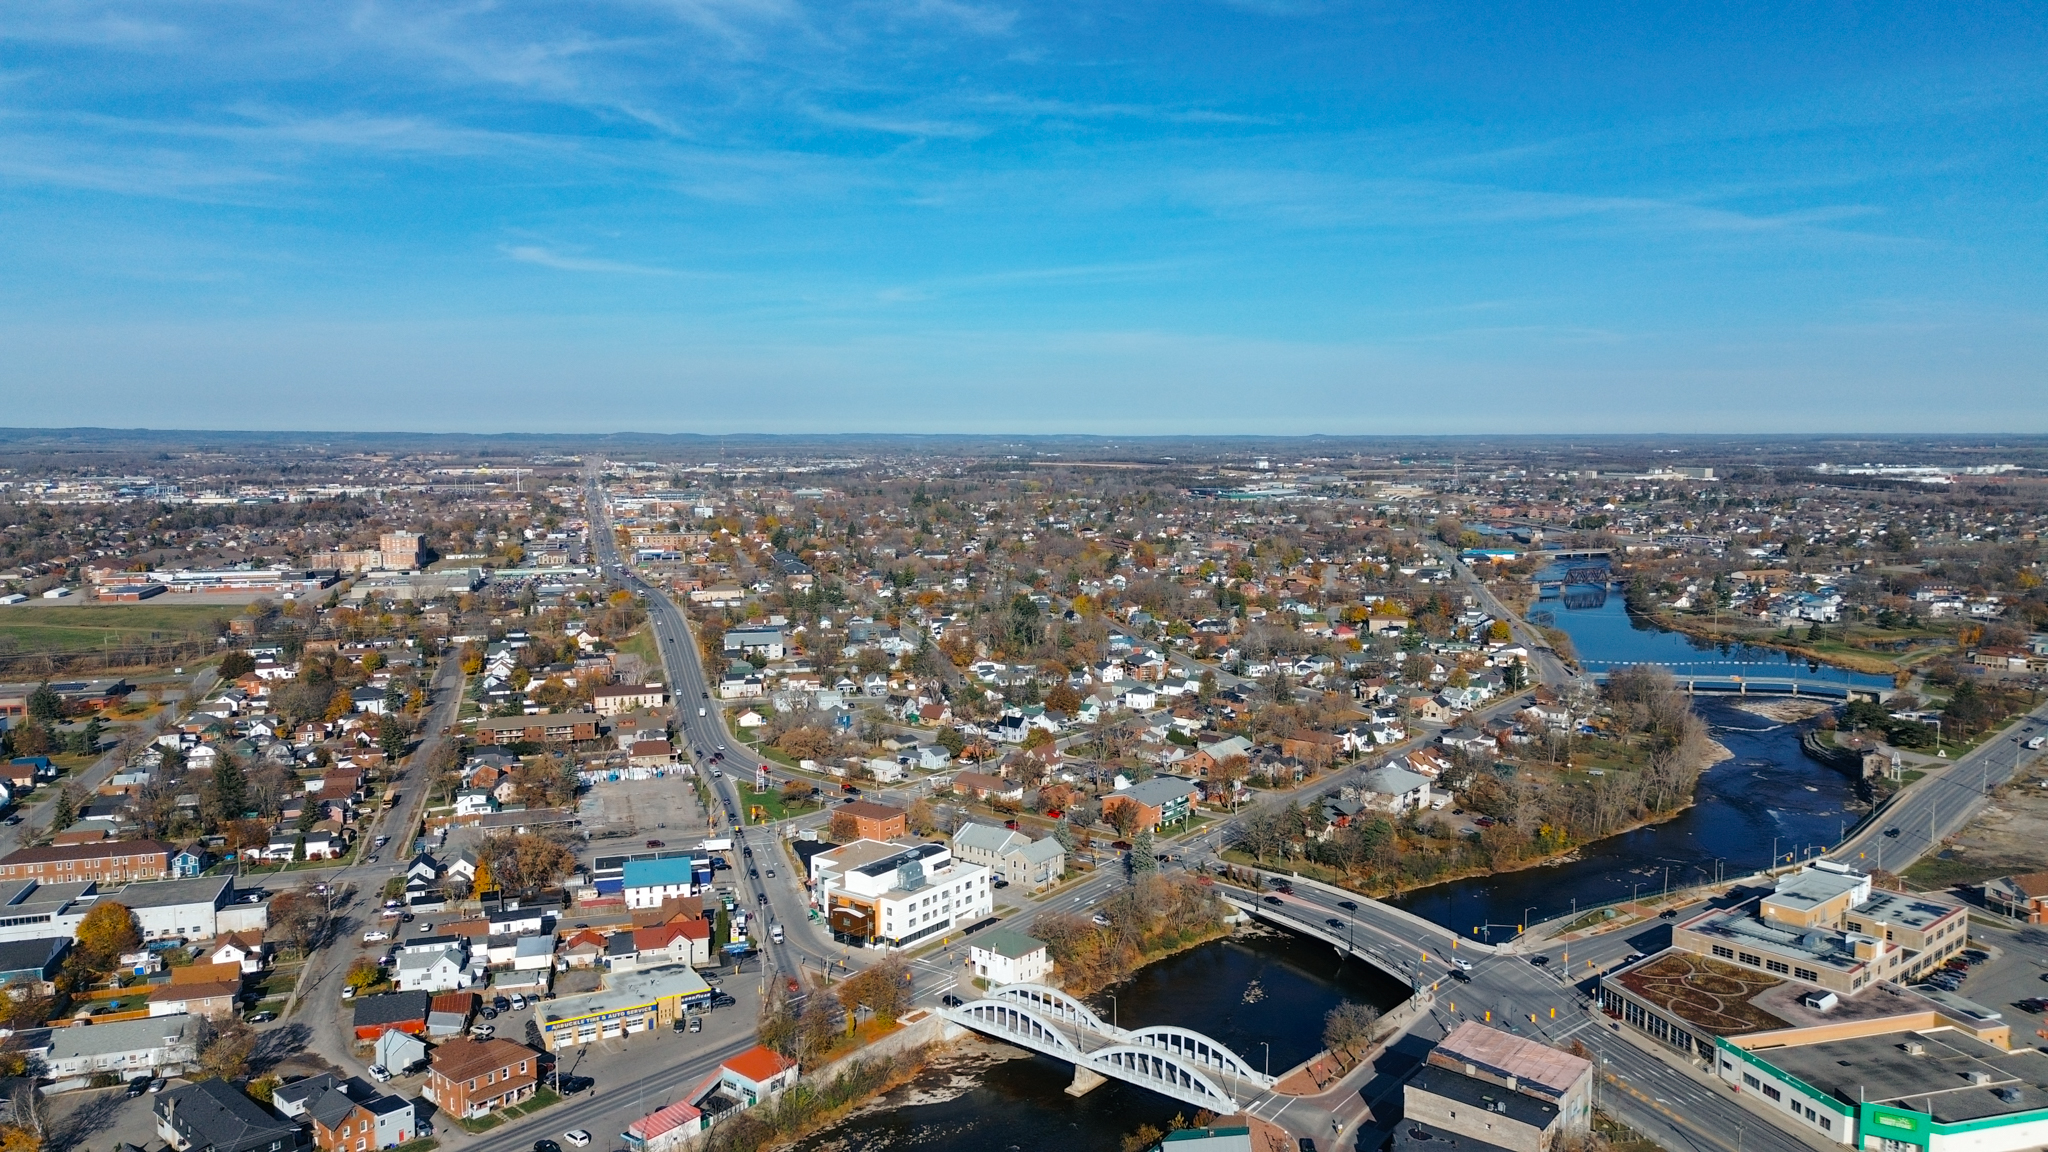 Bird's eye view of the City of Belleville